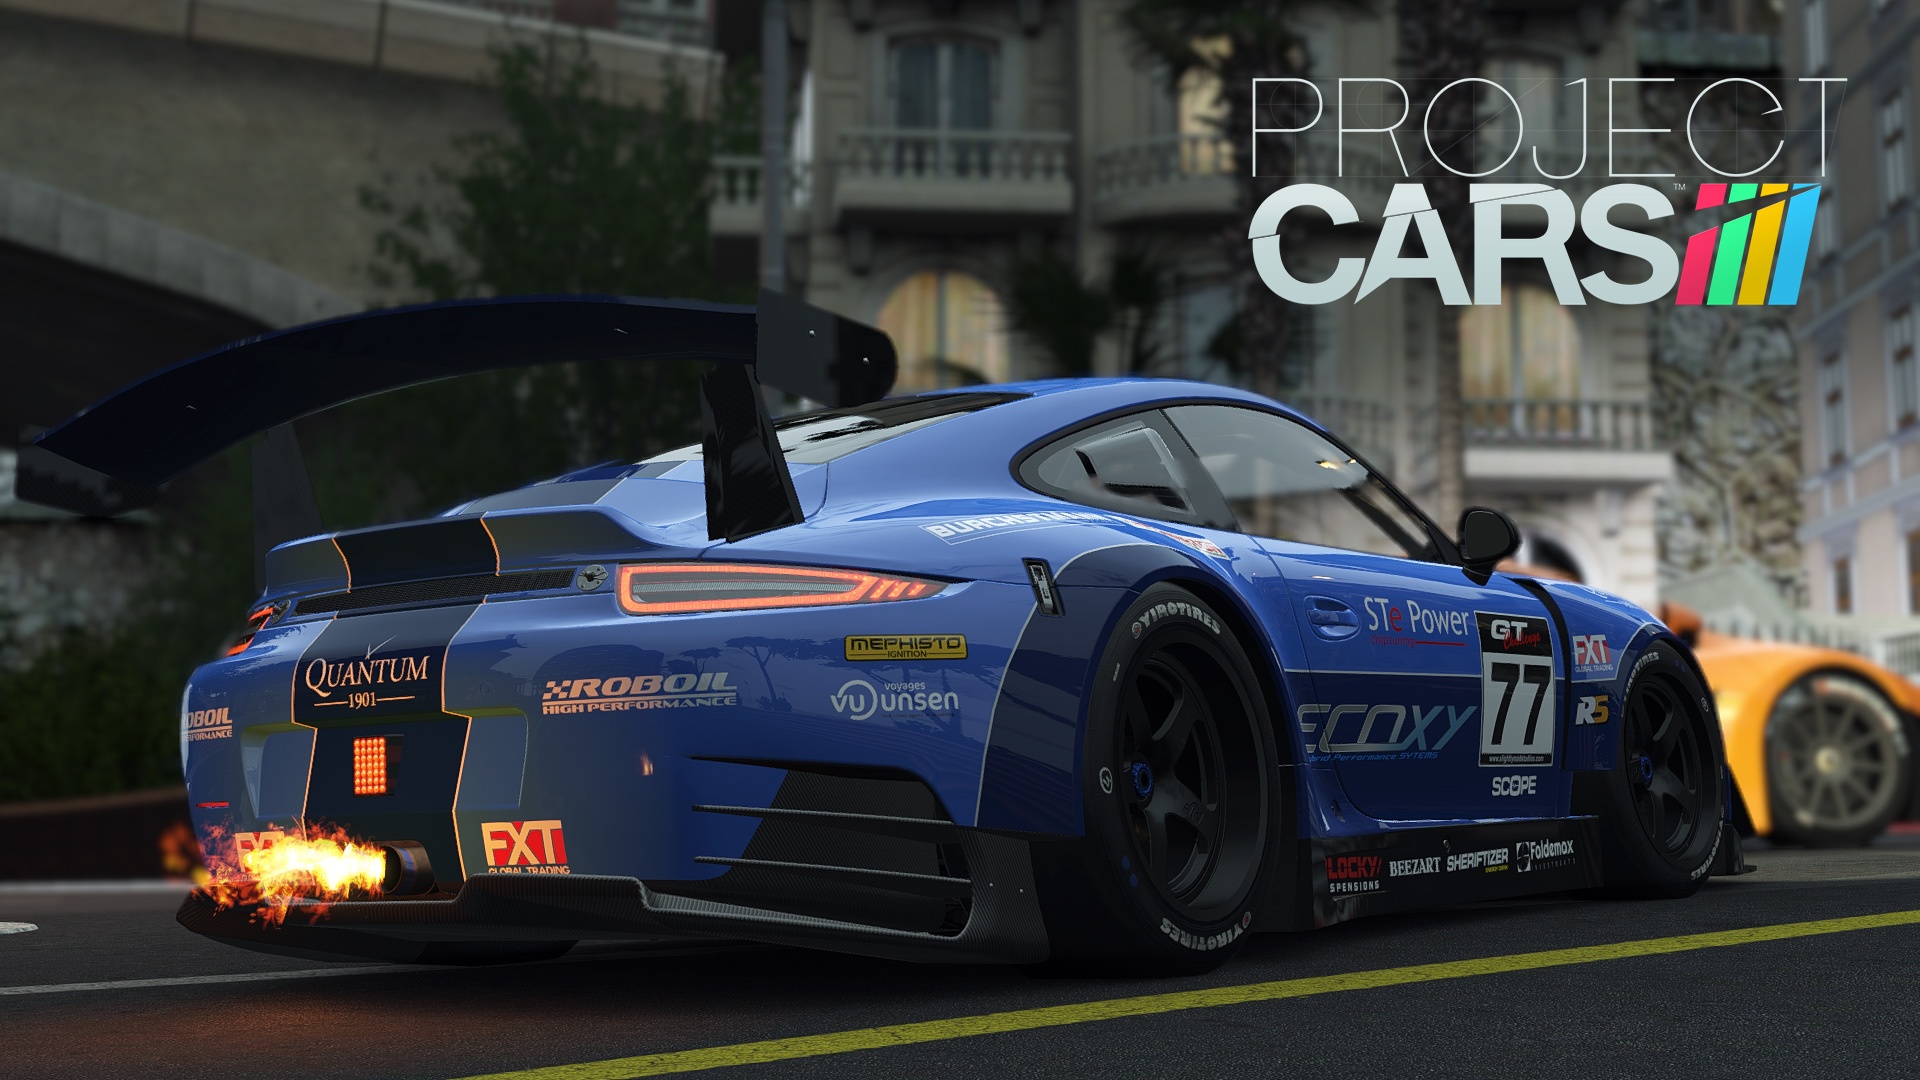 5 Top Tips For Project Cars